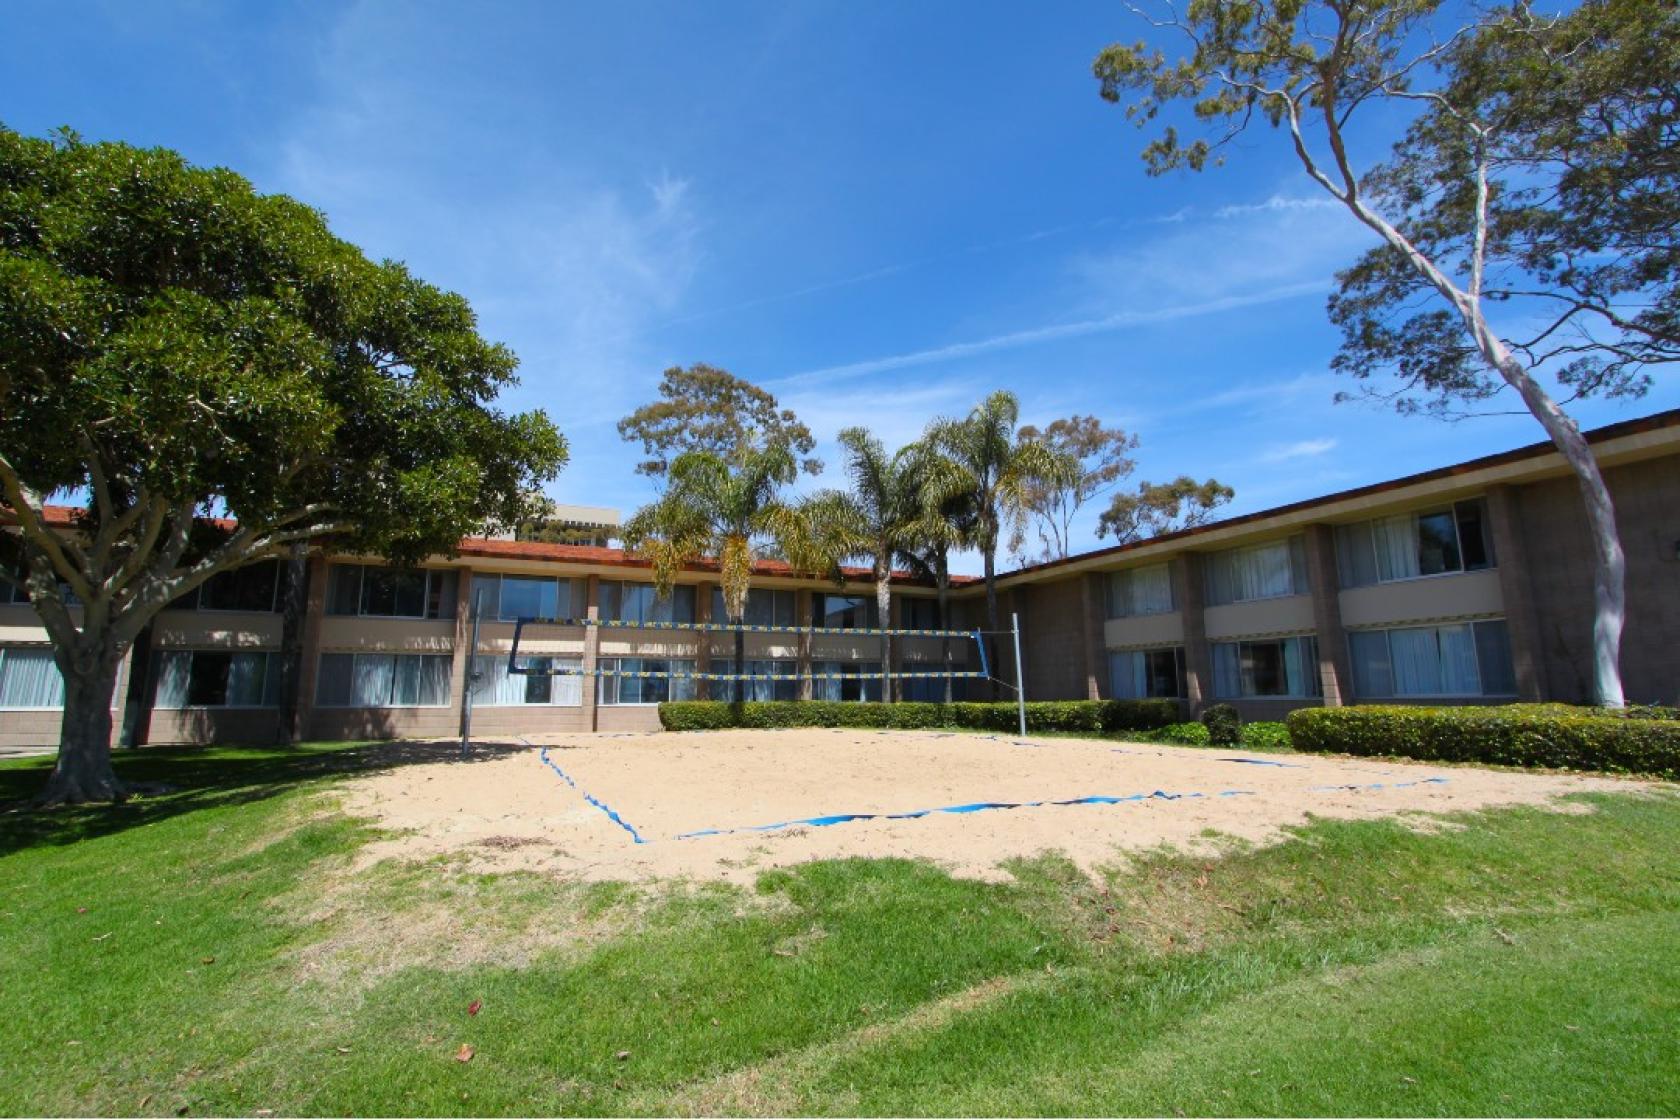 In the foreground there is a green lawn. ON the left there is a big shady tree next to which you can see a sandy beach volleyball court. In the back is a midcentury two-story cinder block residence hall. You can see a sunny and blue sky.